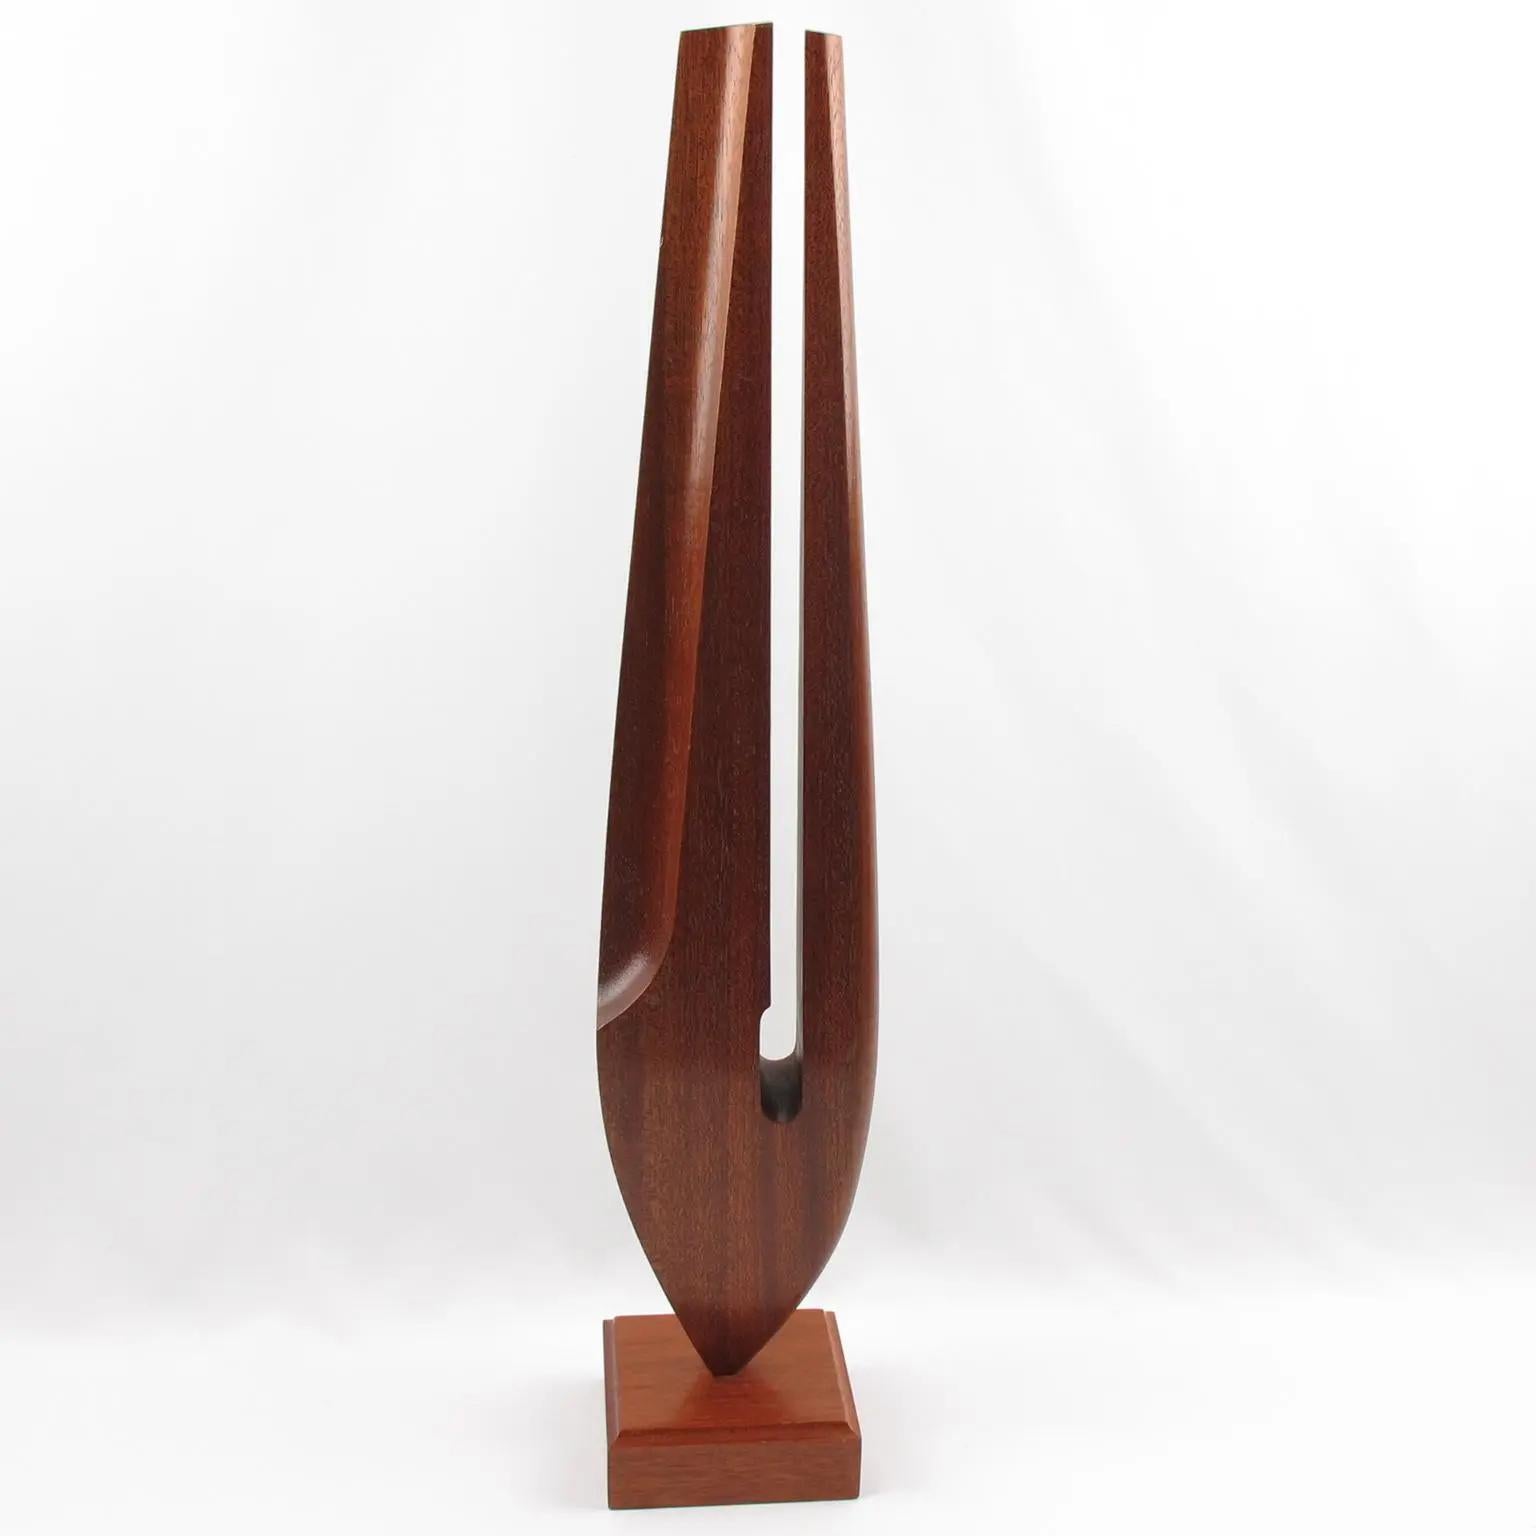 This stunning tropical wood sculpture is architecturally impressive with its stylized tuning fork design. The elongated wooden ornament sits atop a square wood base, featuring geometric lines and golden cut proportions that exude a modern and